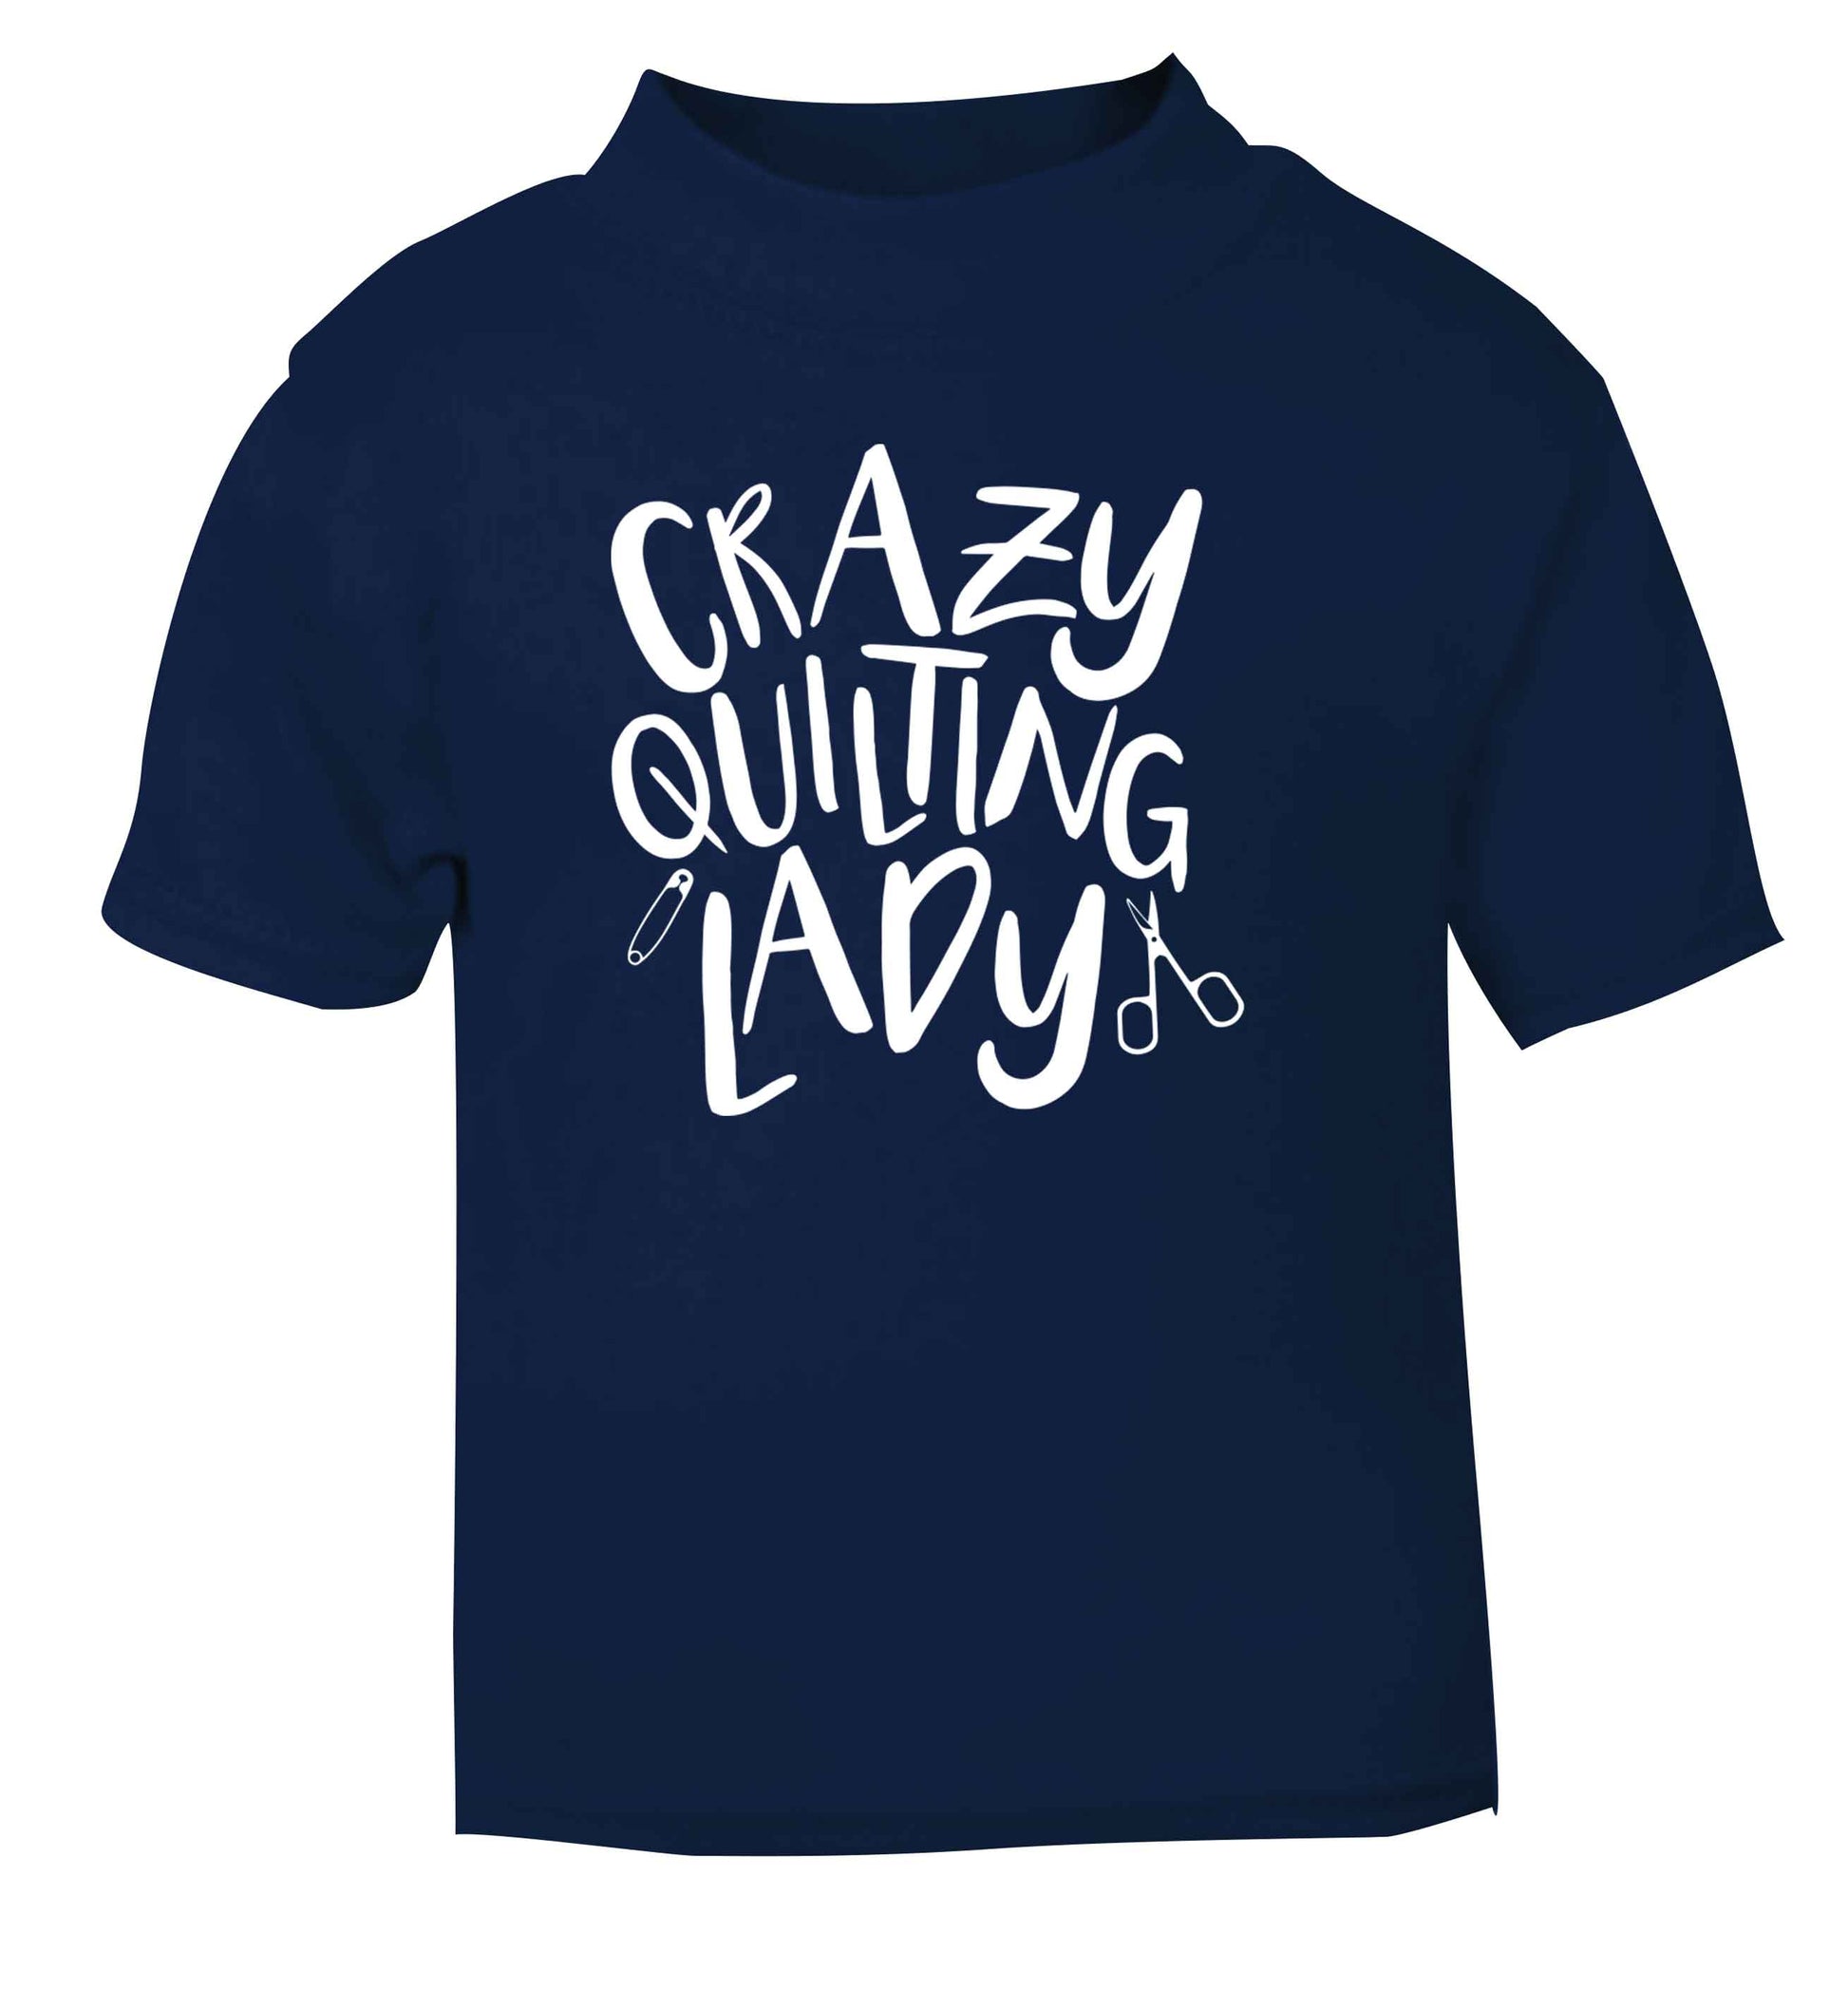 Crazy quilting lady navy Baby Toddler Tshirt 2 Years